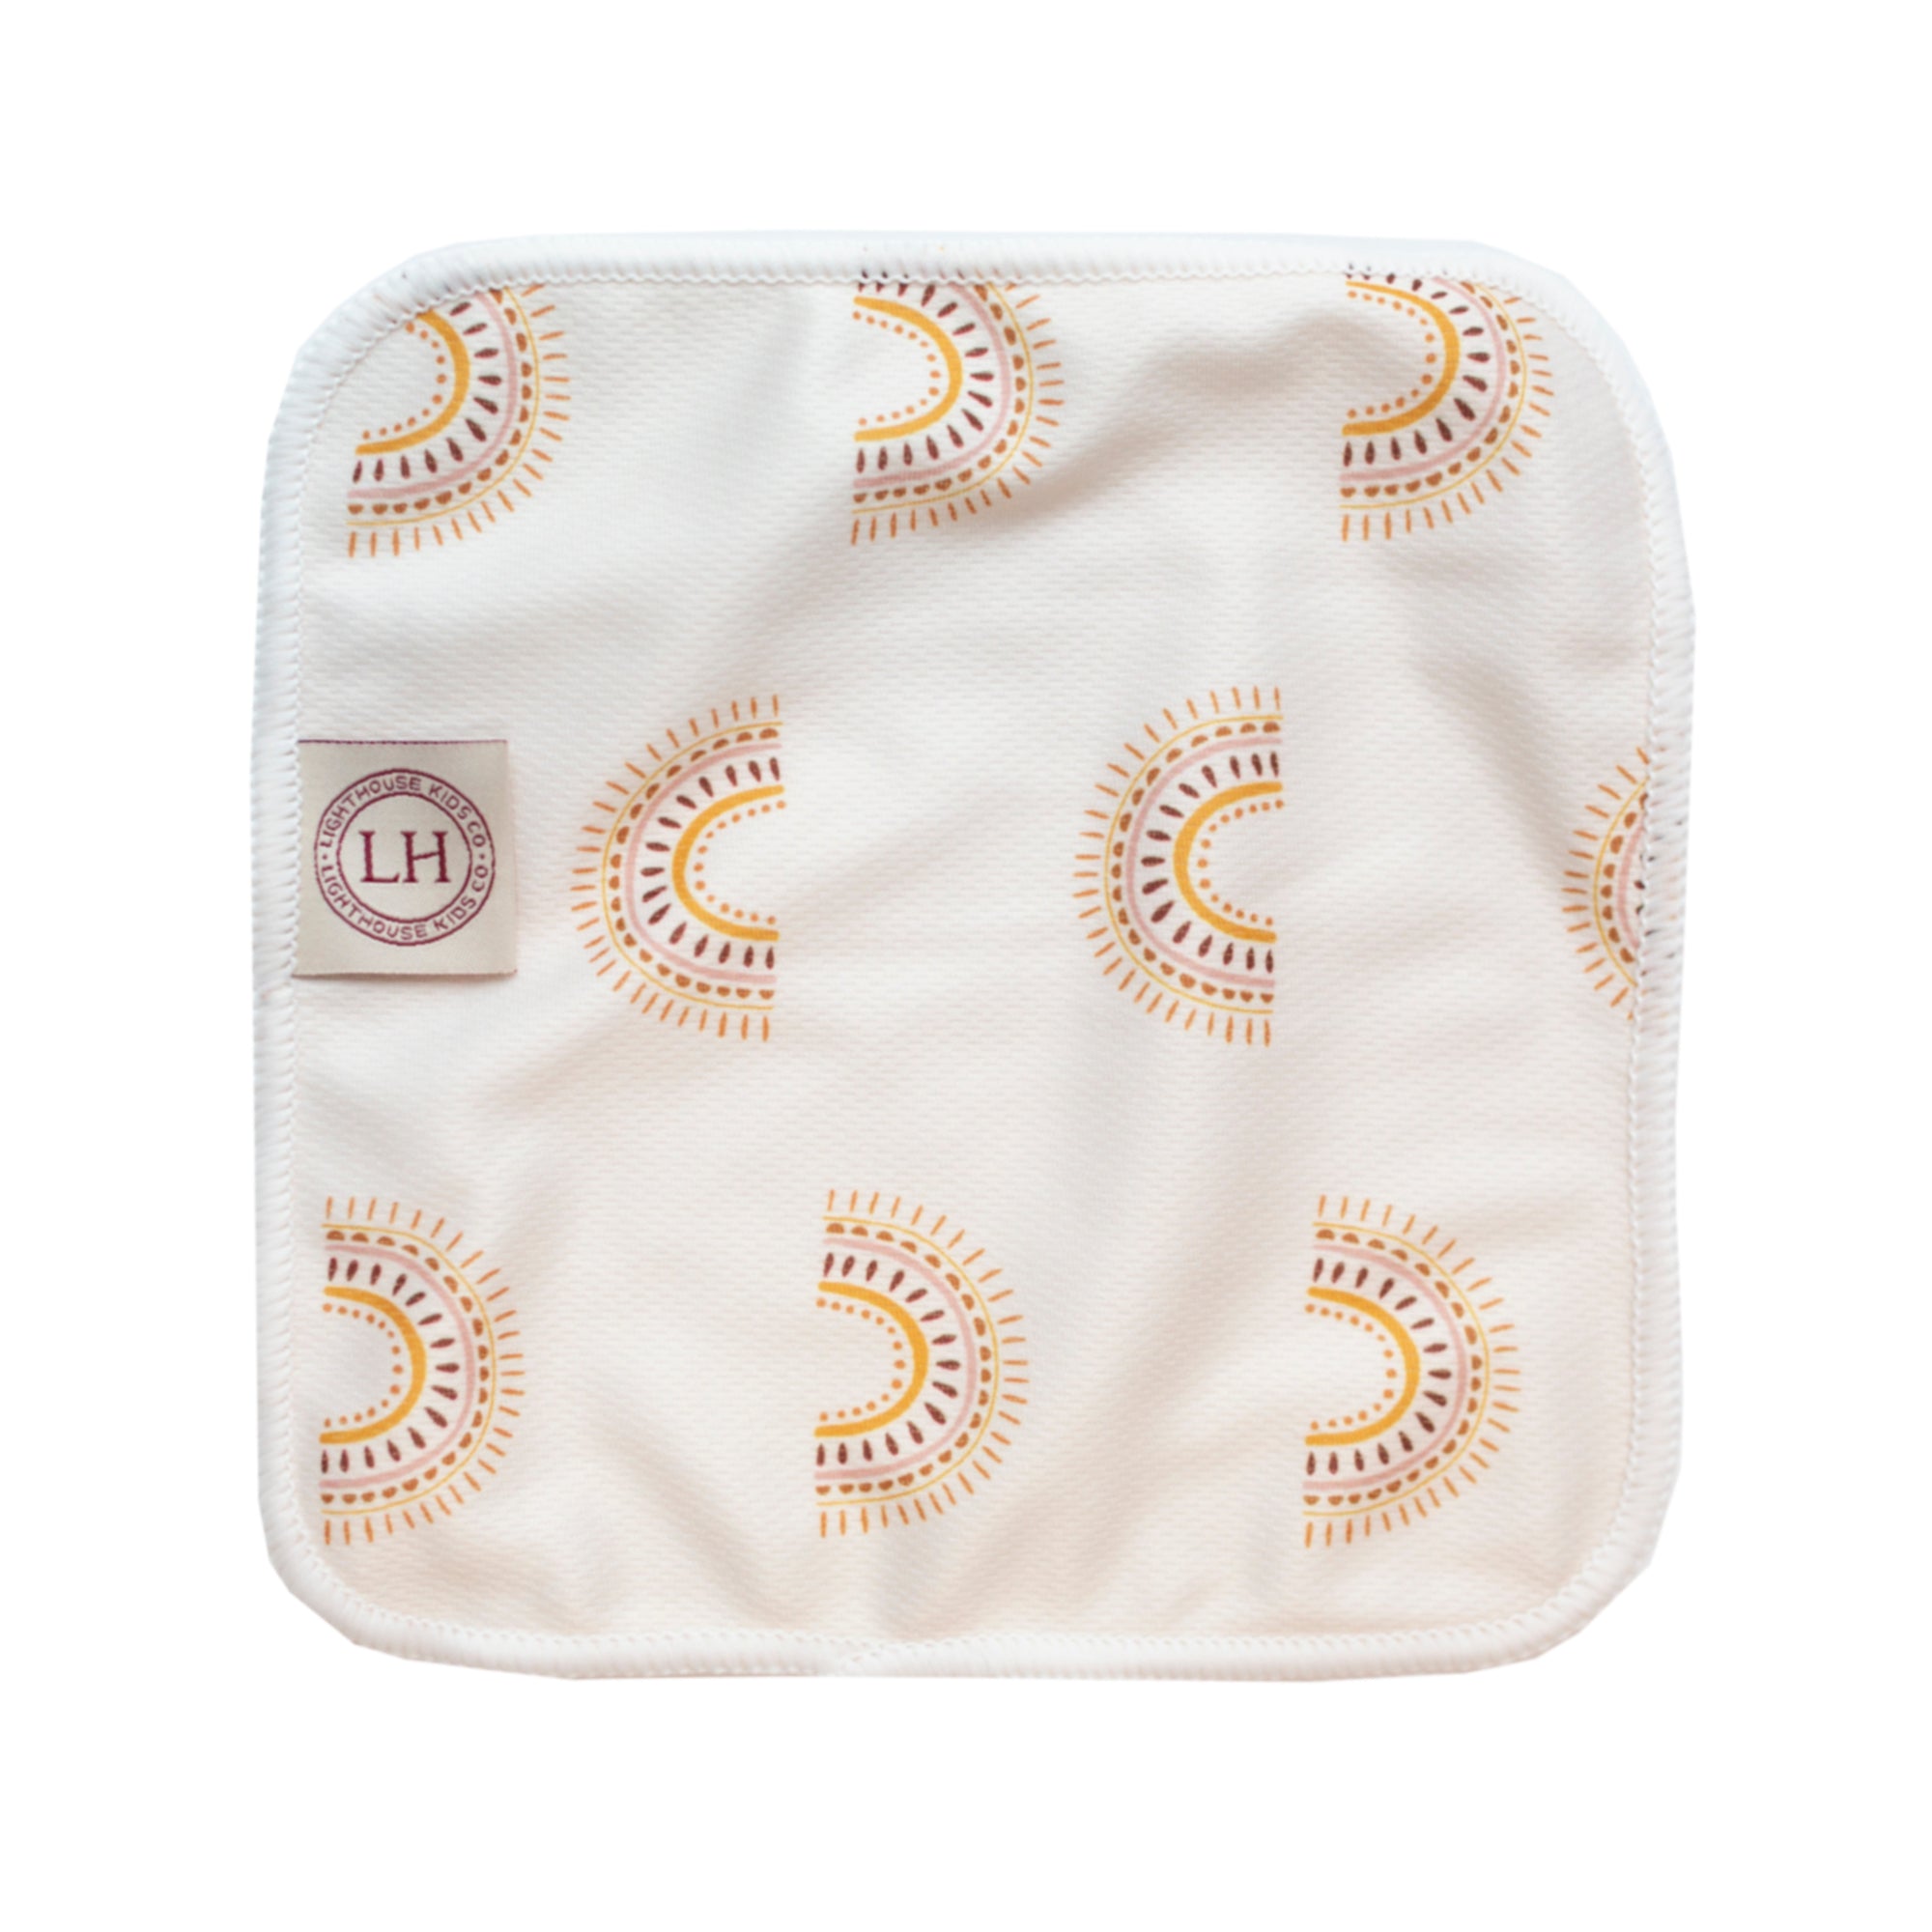 Reusable Cloth Wipes with Athletic Wicking Jersey (AWJ) - Cali Rainbow